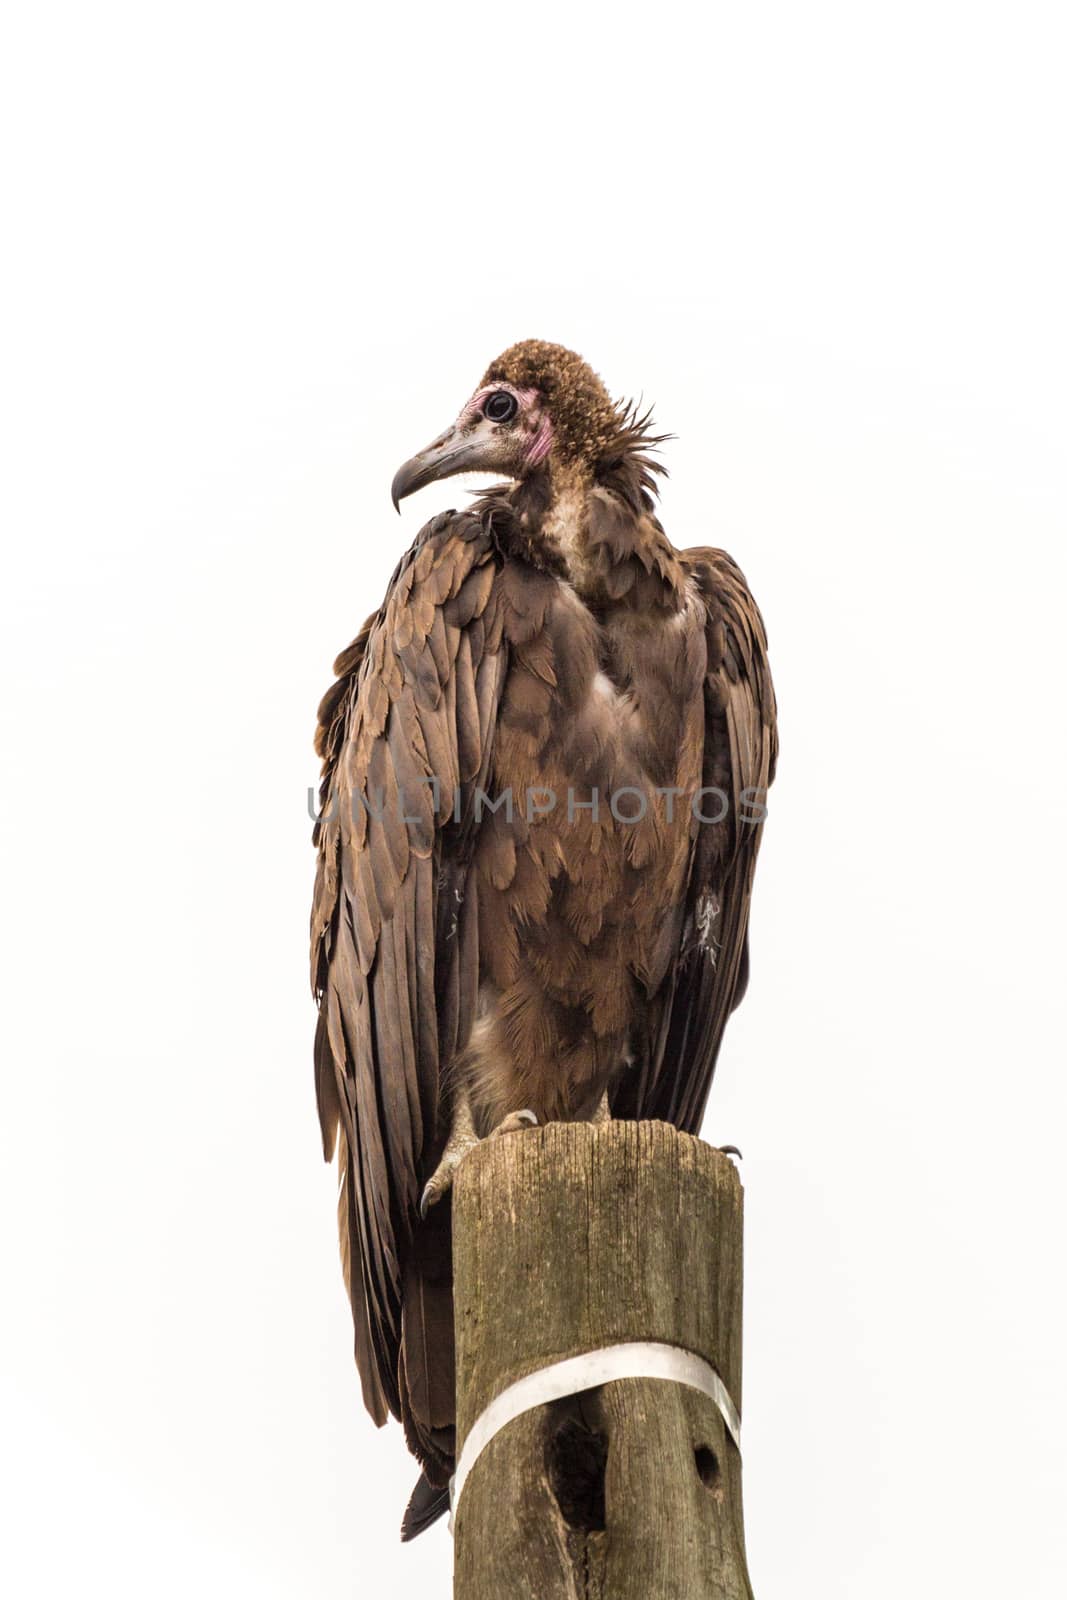 A large vulture standing on a wooden telephone pole with its head up